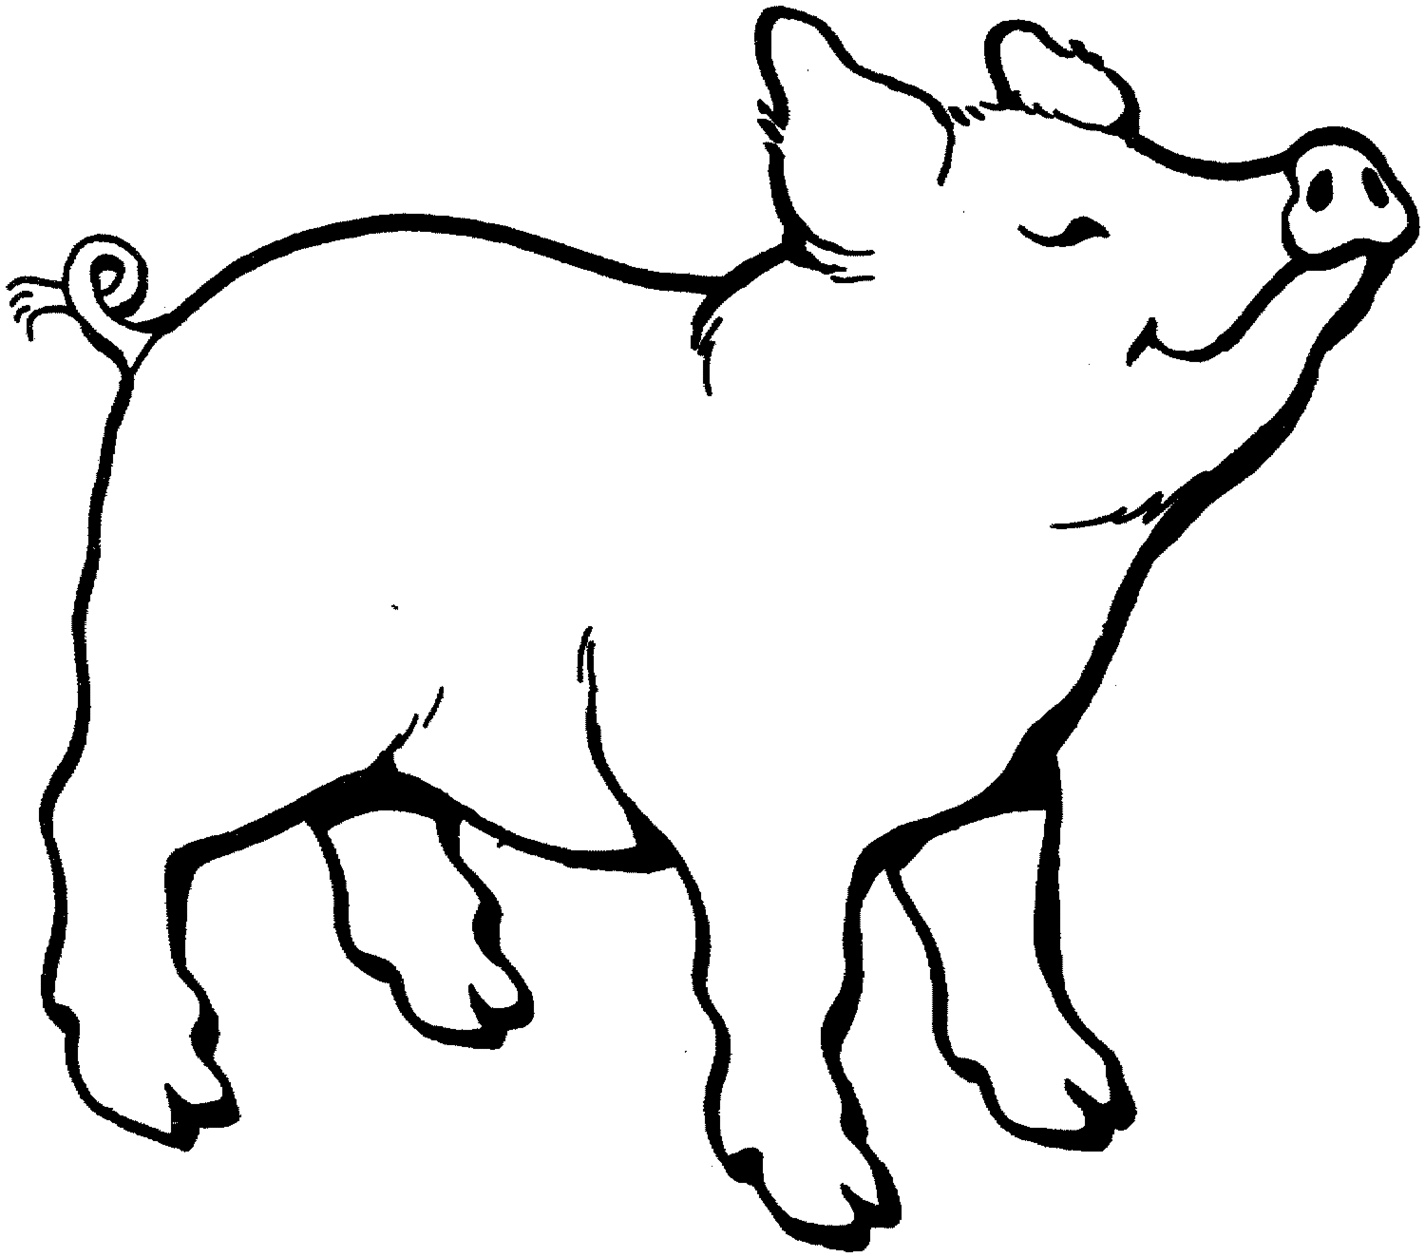 ... Pig Clipart Black And Whi